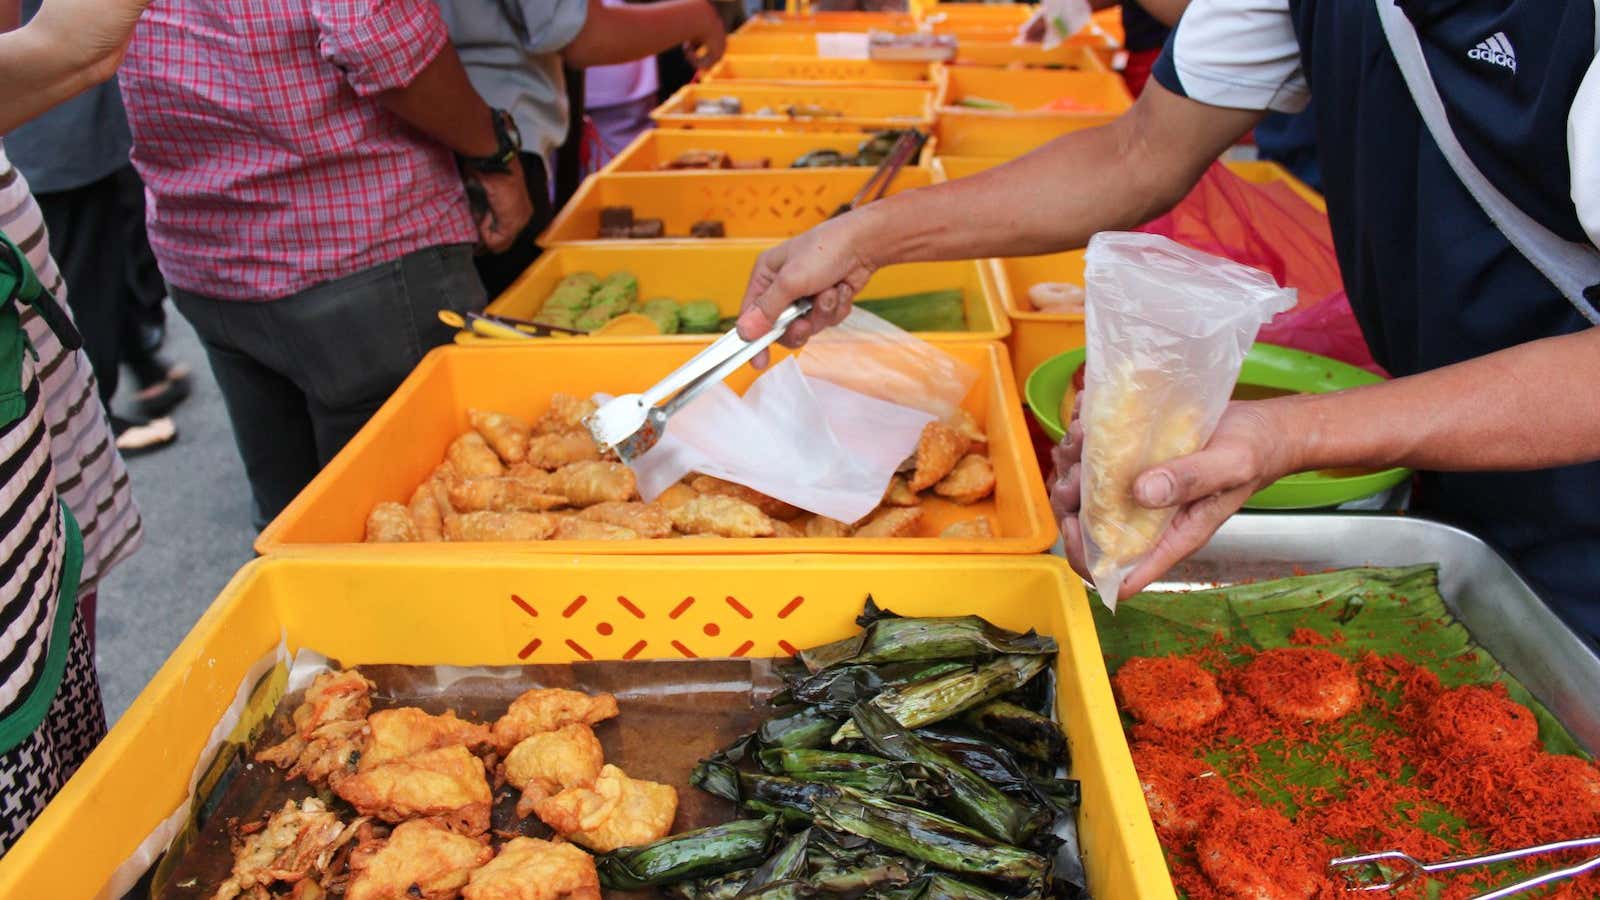 Malaysia’s irresistible street food gets even better during Ramadan